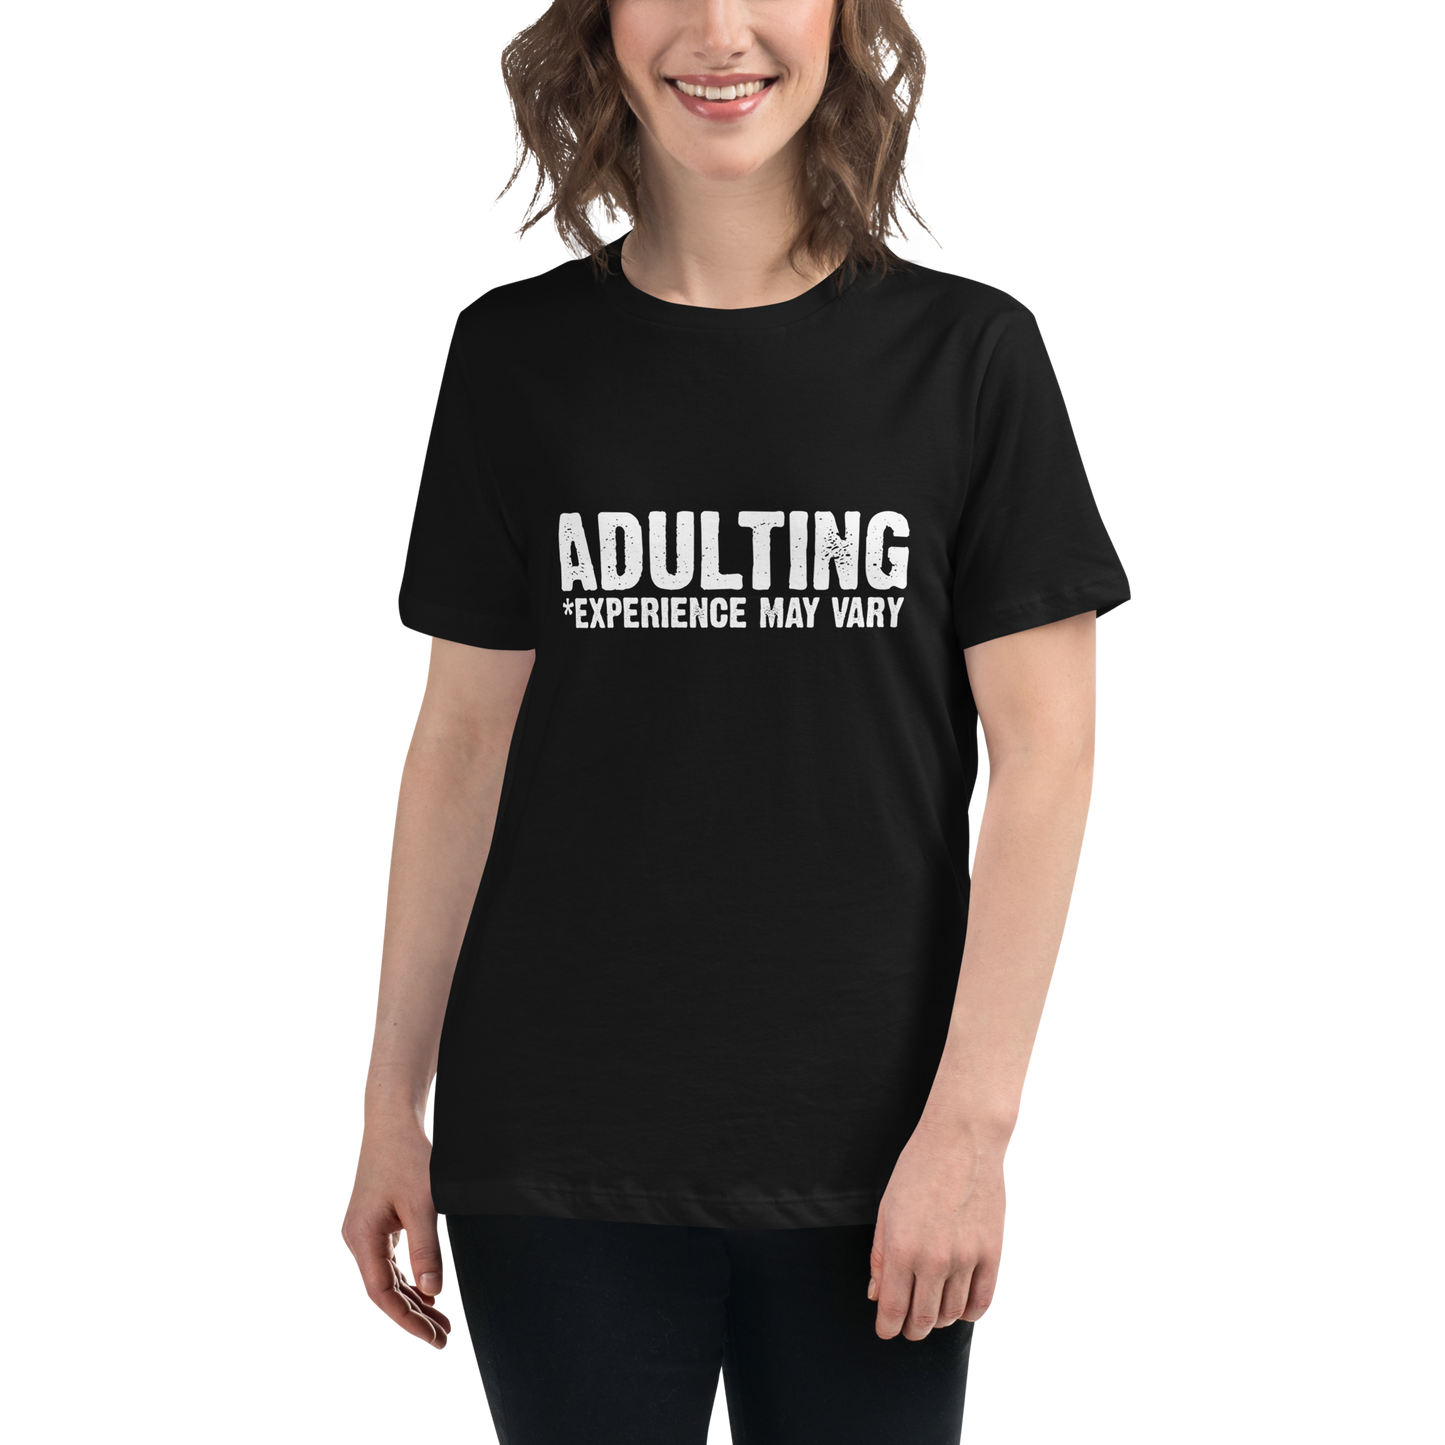 Women's - Adulting *Experience May Vary - Funny T-Shirt